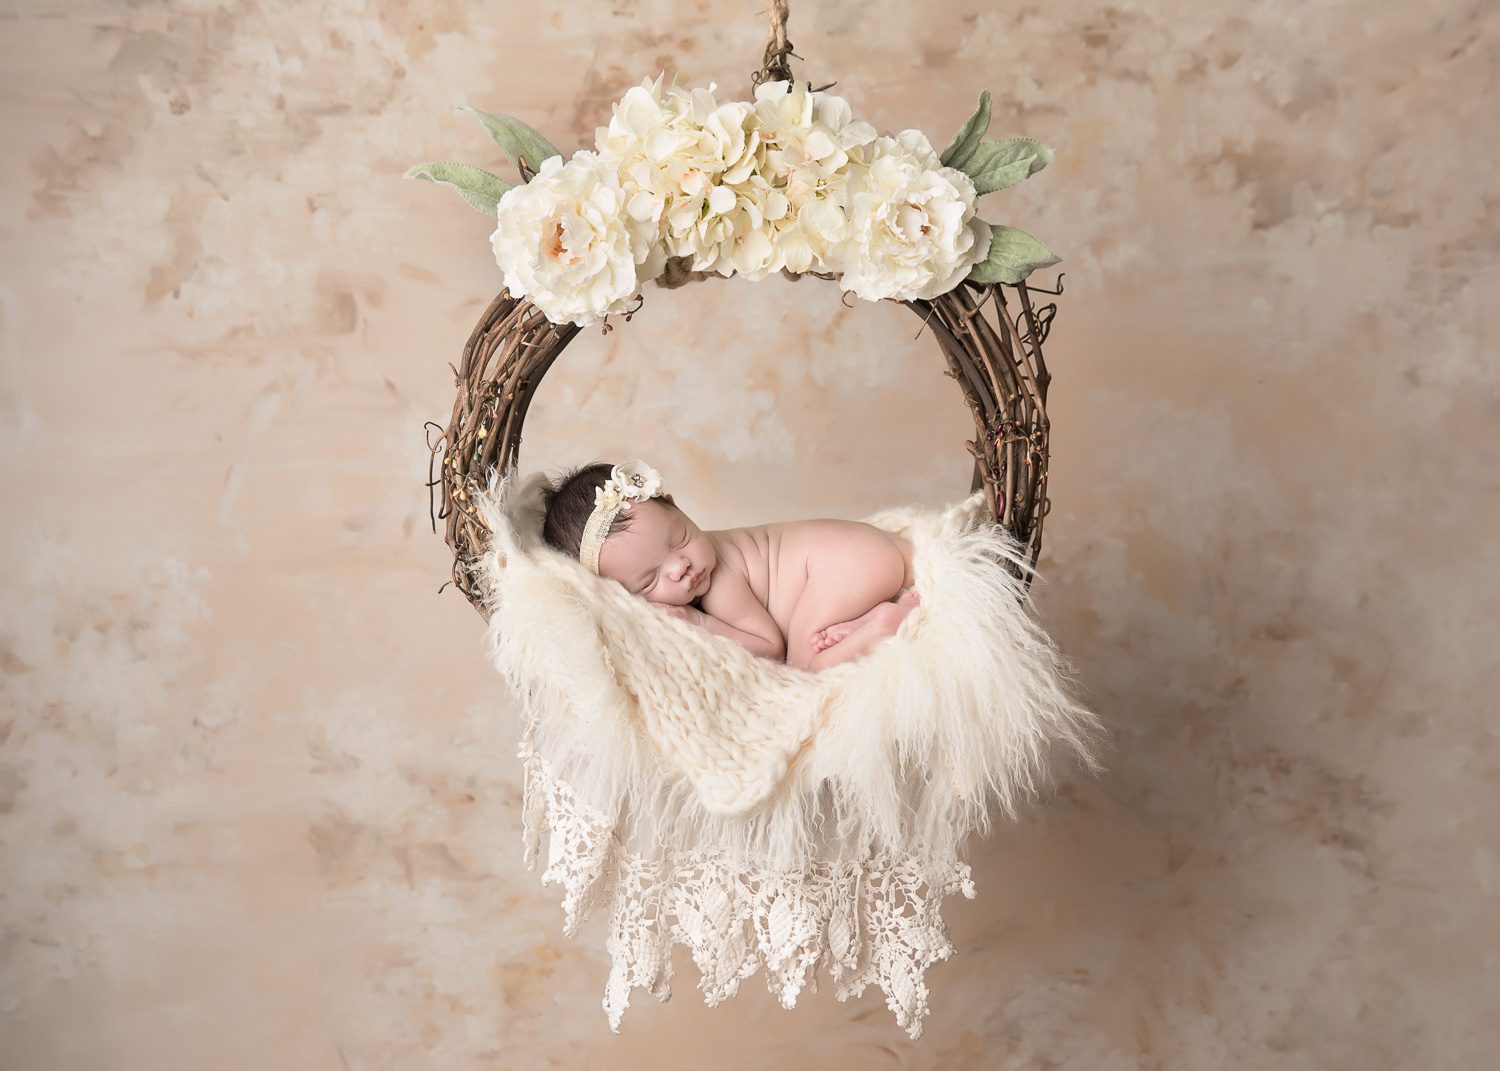 Newborn girl laying in hanging in wreath wit cream flowers on top. The background behind her is cream florals.